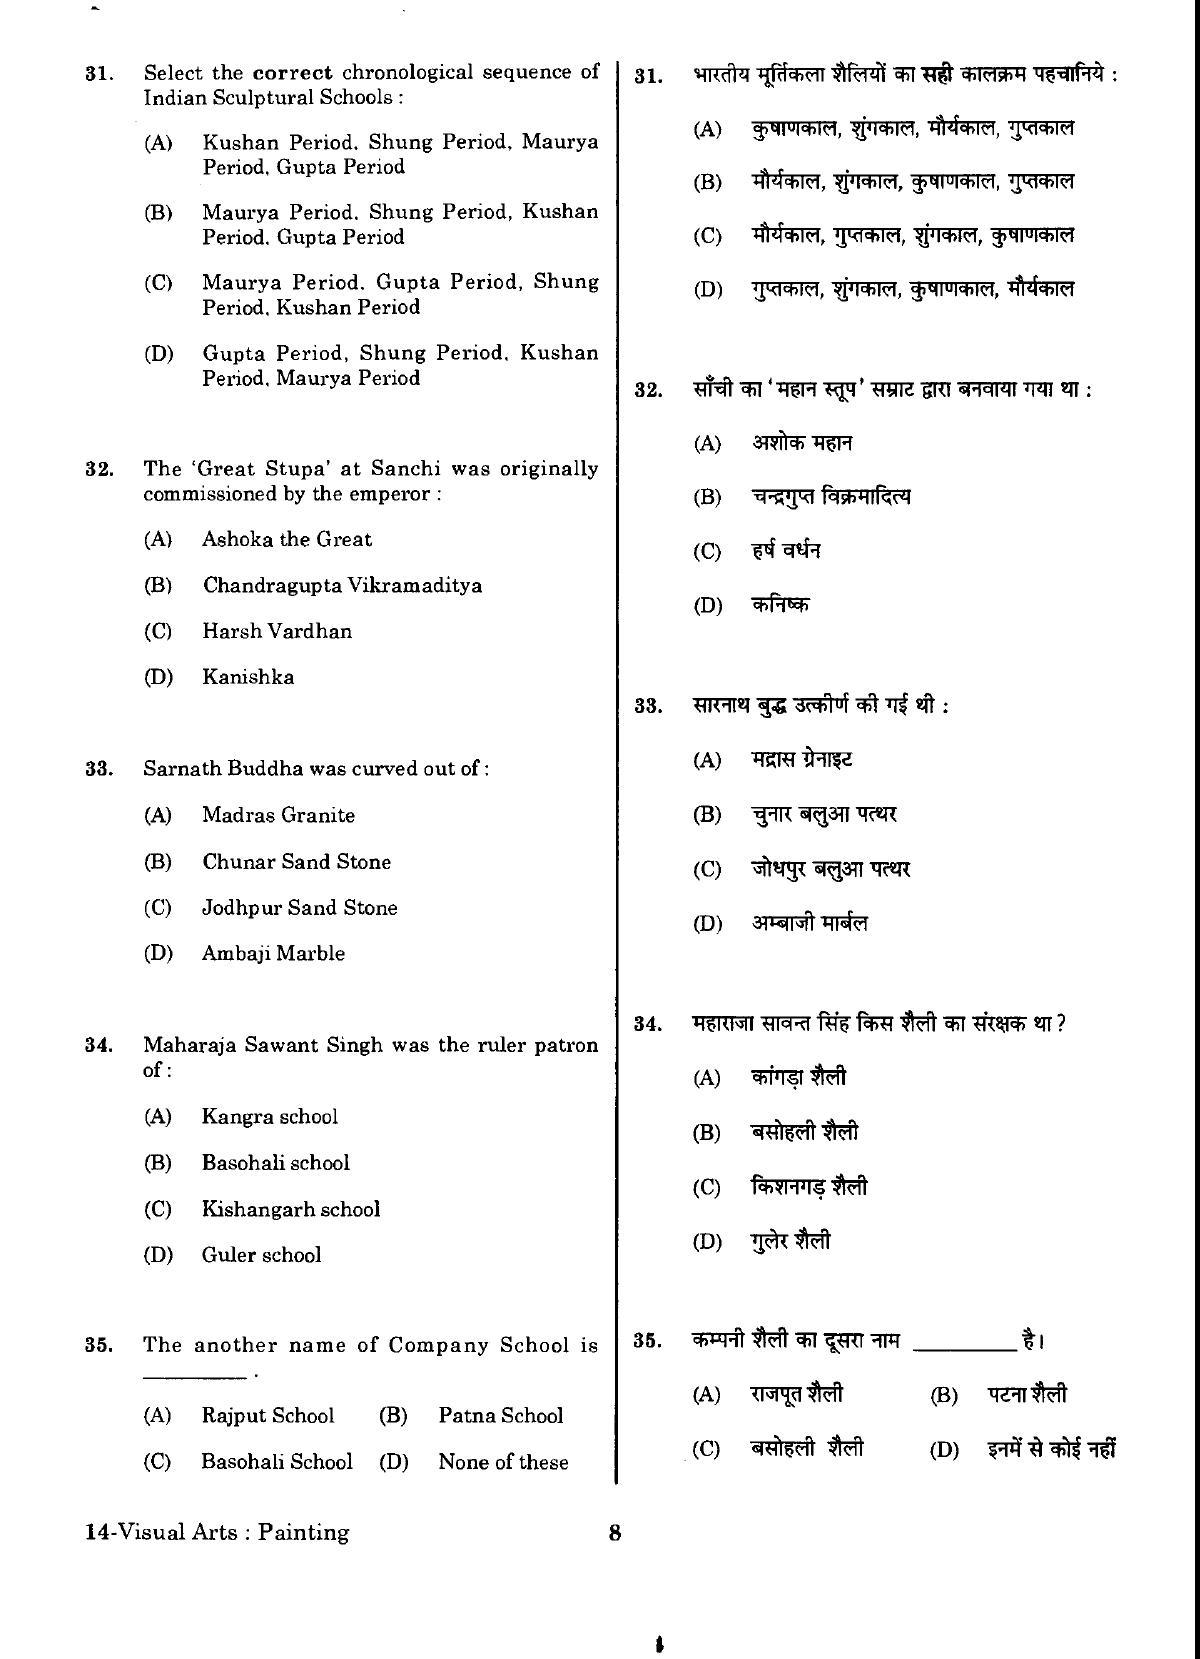 URATPG Visual Arts Painting Sample Question Paper 2018 - Page 7